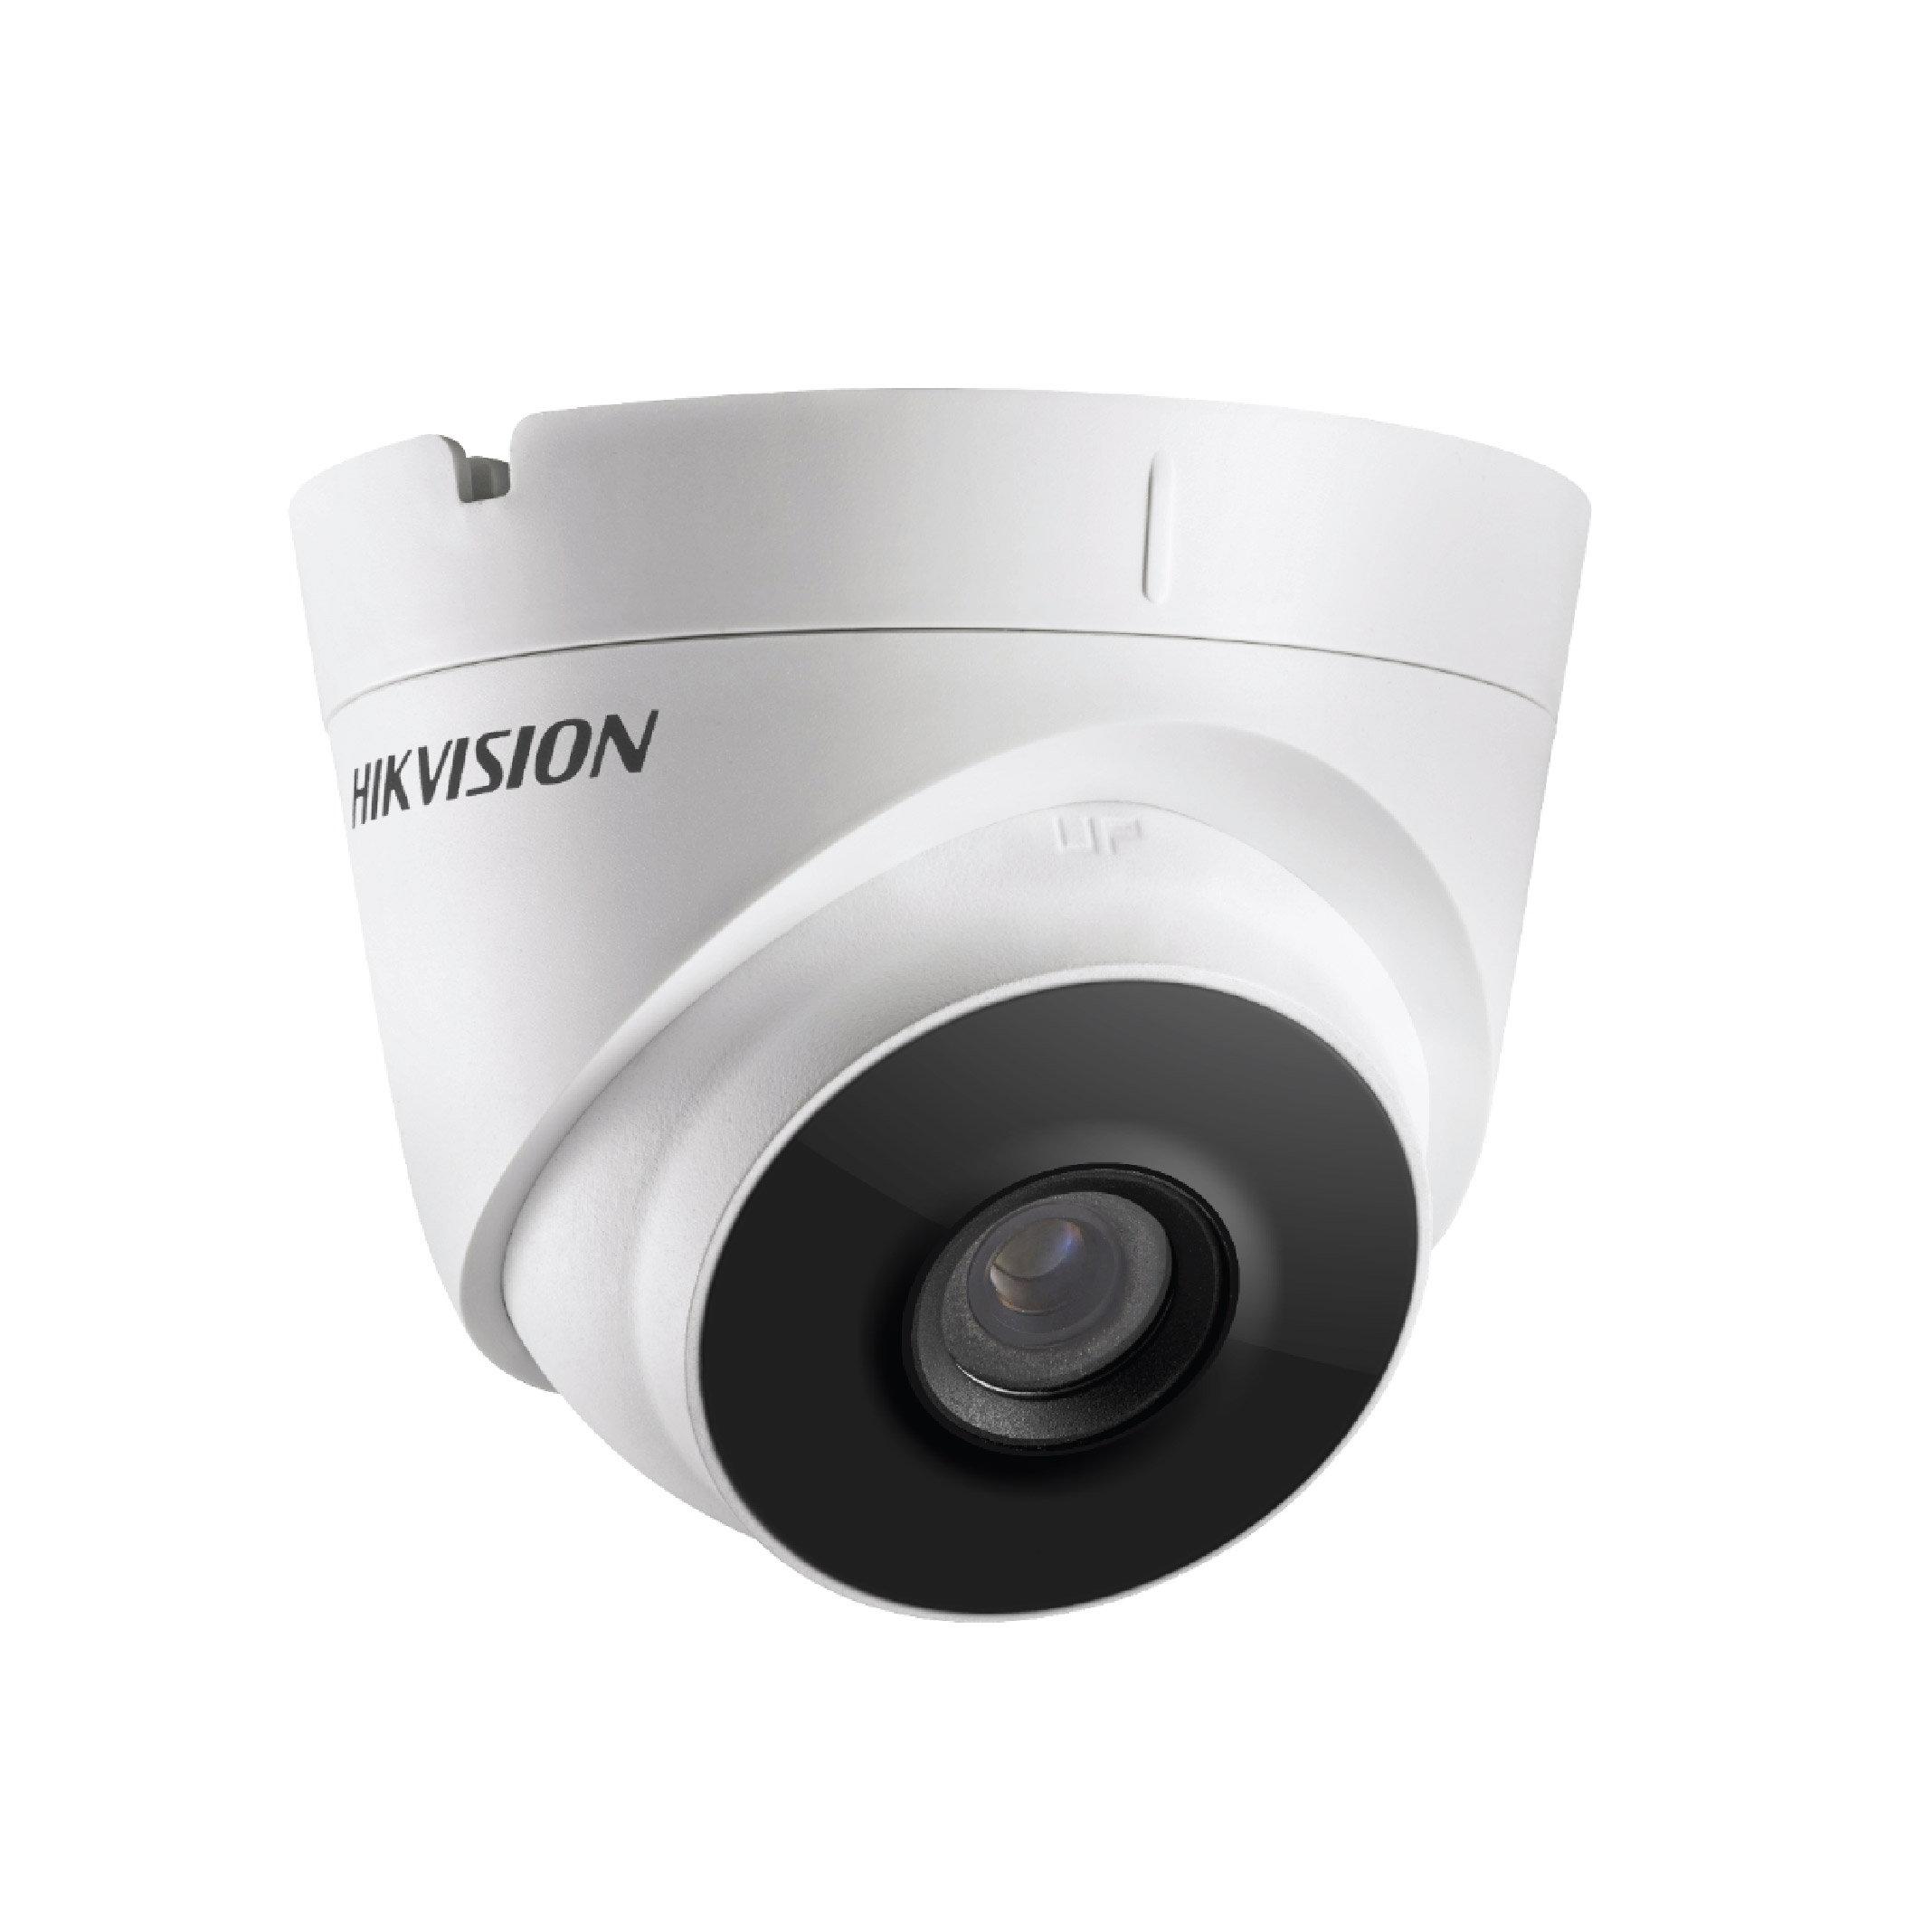 HIKVISION DS-2CE56D8T-IT3F Turbo HD Camera